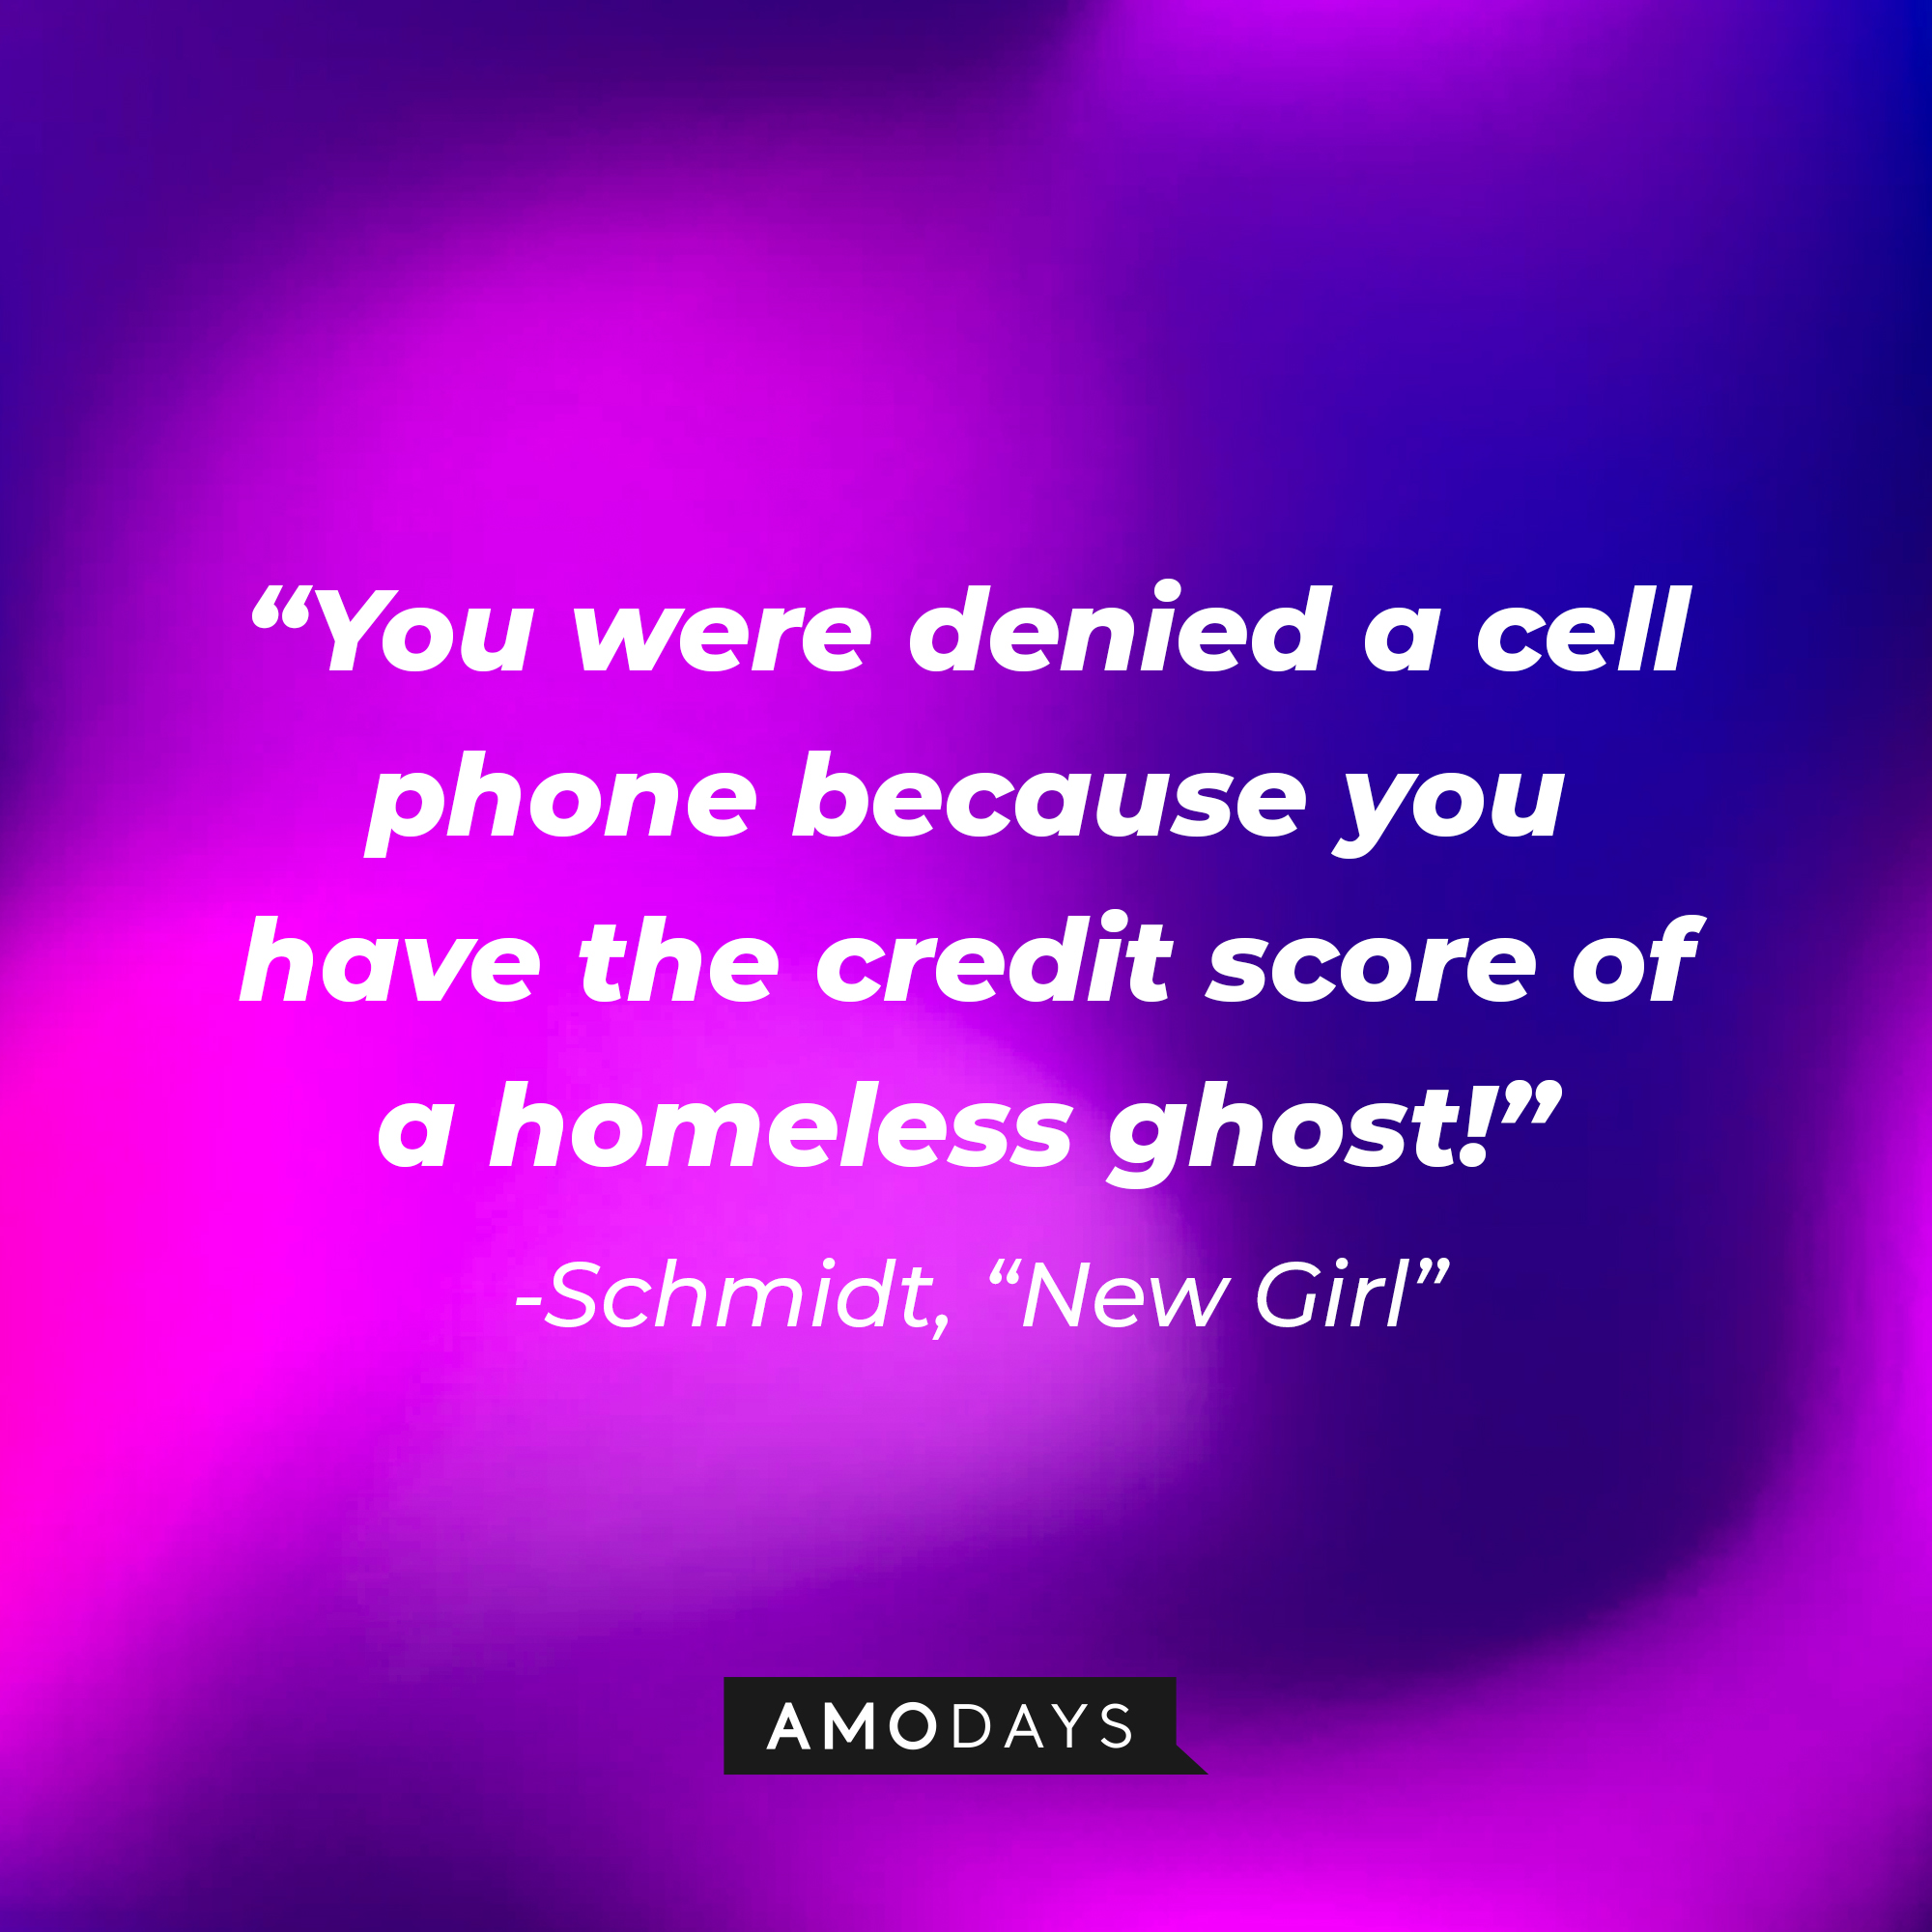 Schmidt's quote: “You were denied a cell phone because you have the credit score of a homeless ghost!” | Source: Amodays